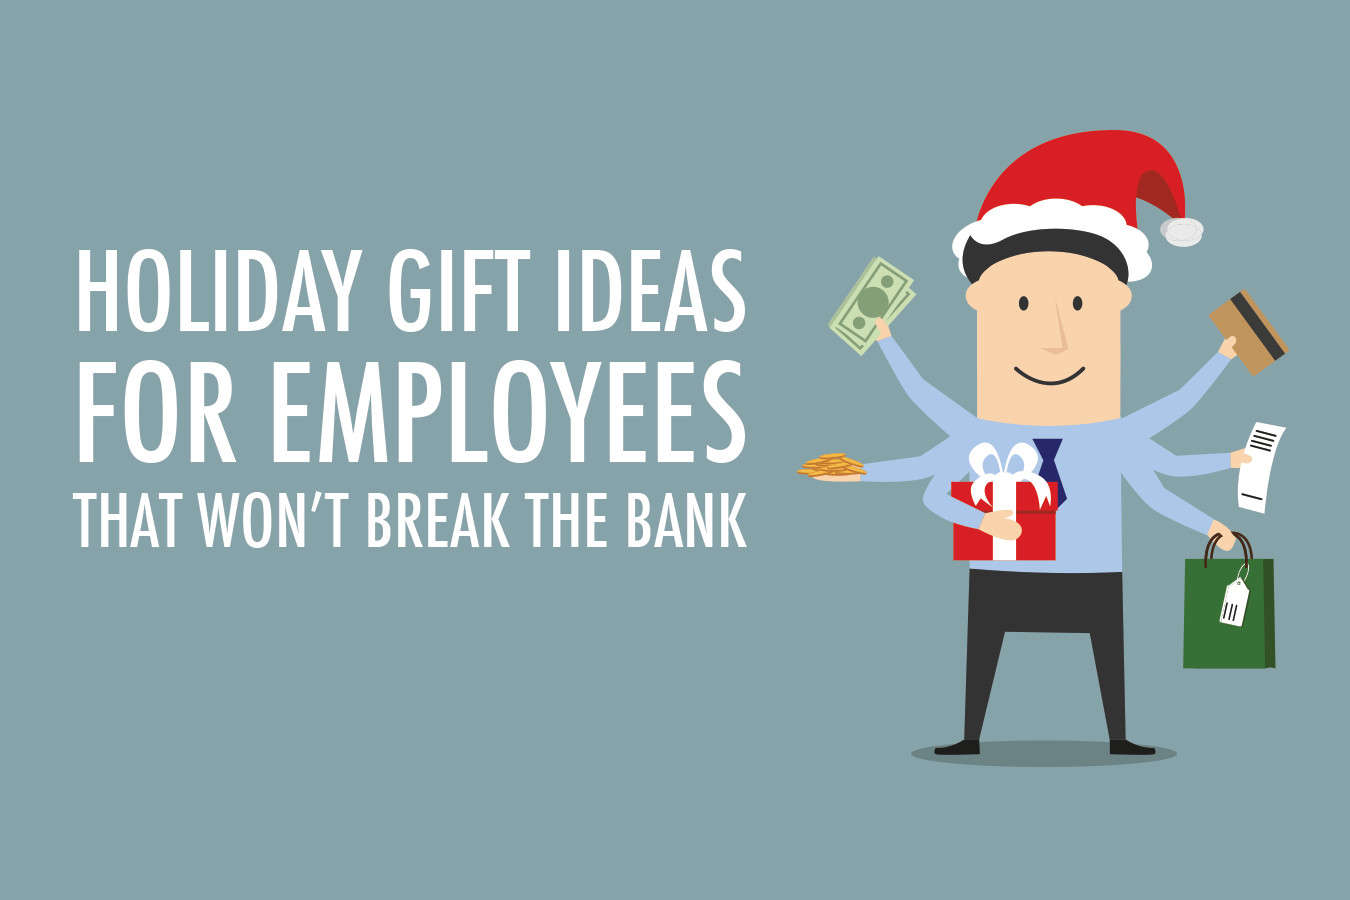 Company Holiday Gift Ideas For Employees
 Holiday Gift Ideas for Employees that Won’t Break the Bank